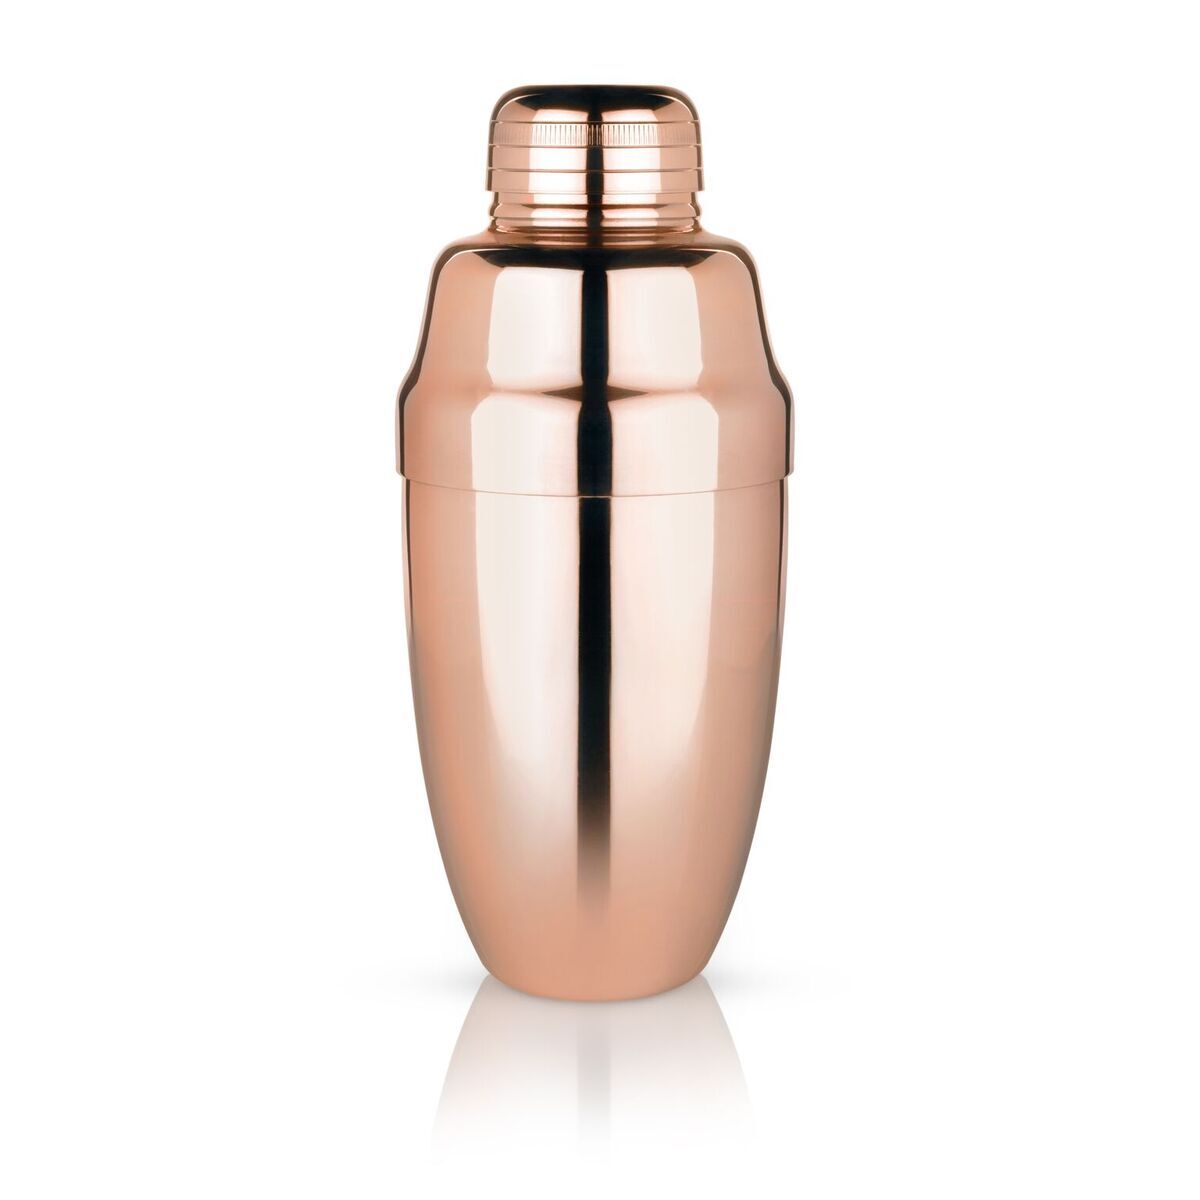 COPPER HEAVYWEIGHT COCKTAIL SHAKER